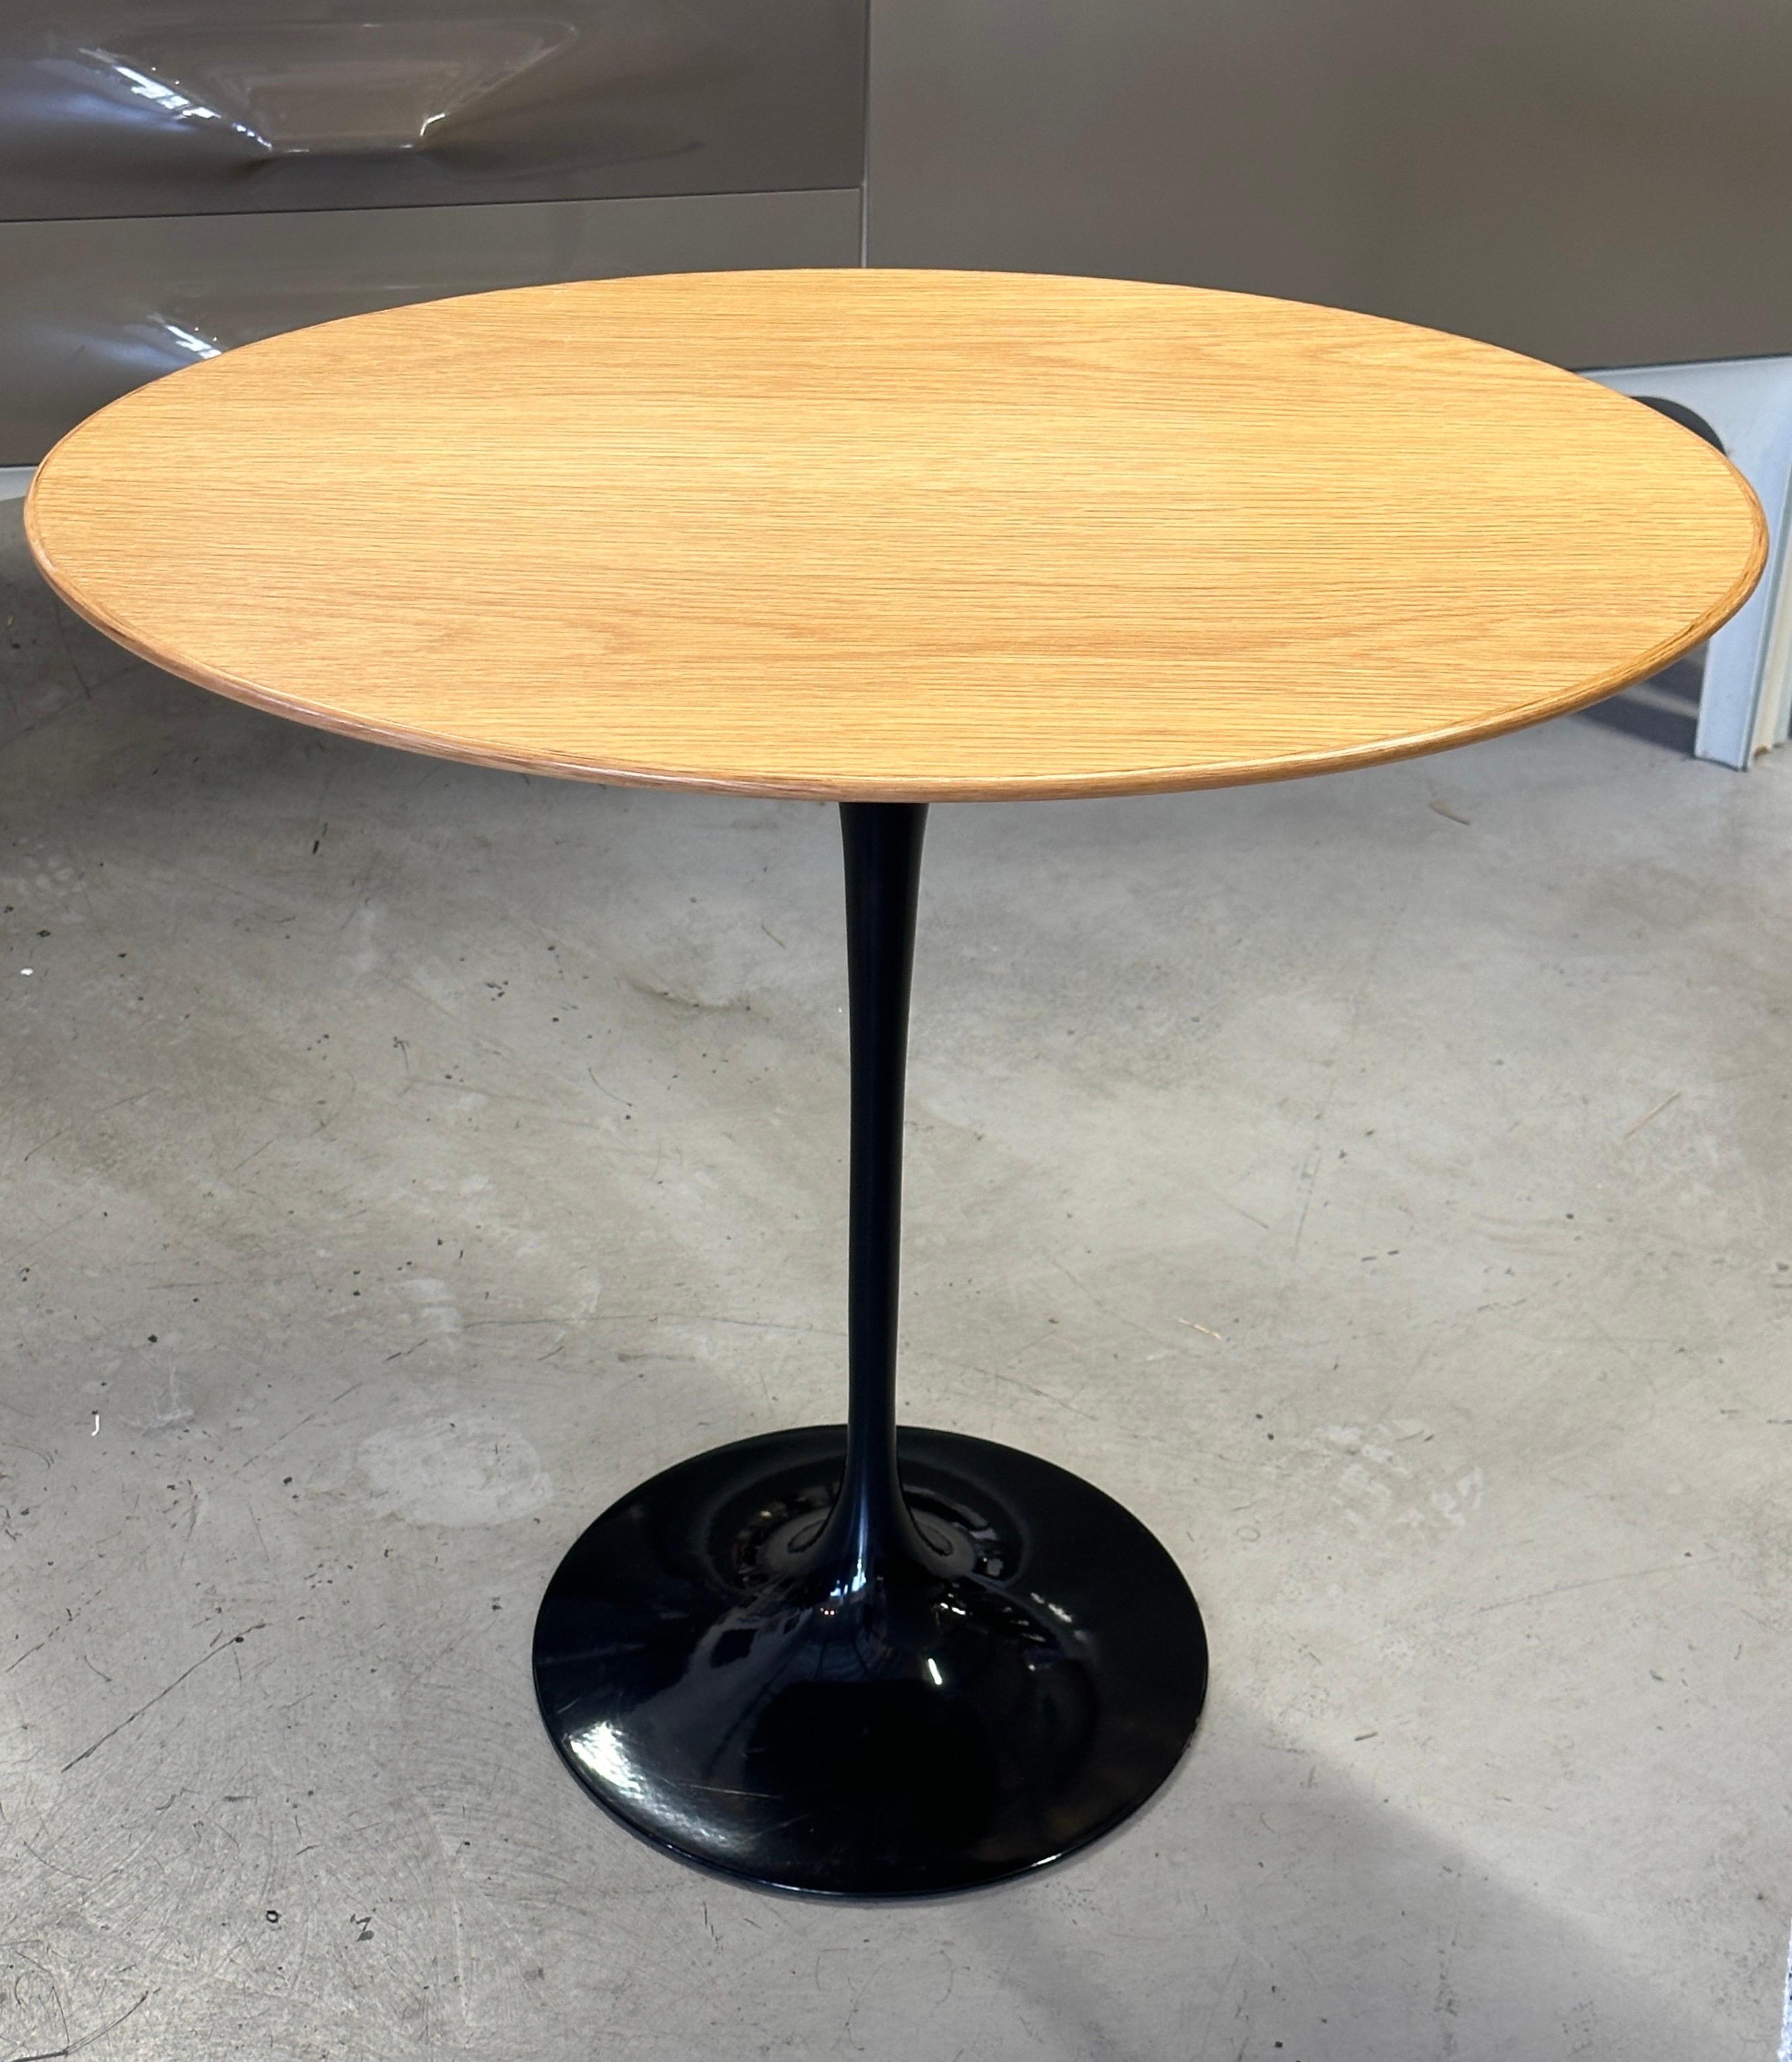 Eero Saarinen for Knoll Oval Tulip Table in Oak and Black For Sale 2